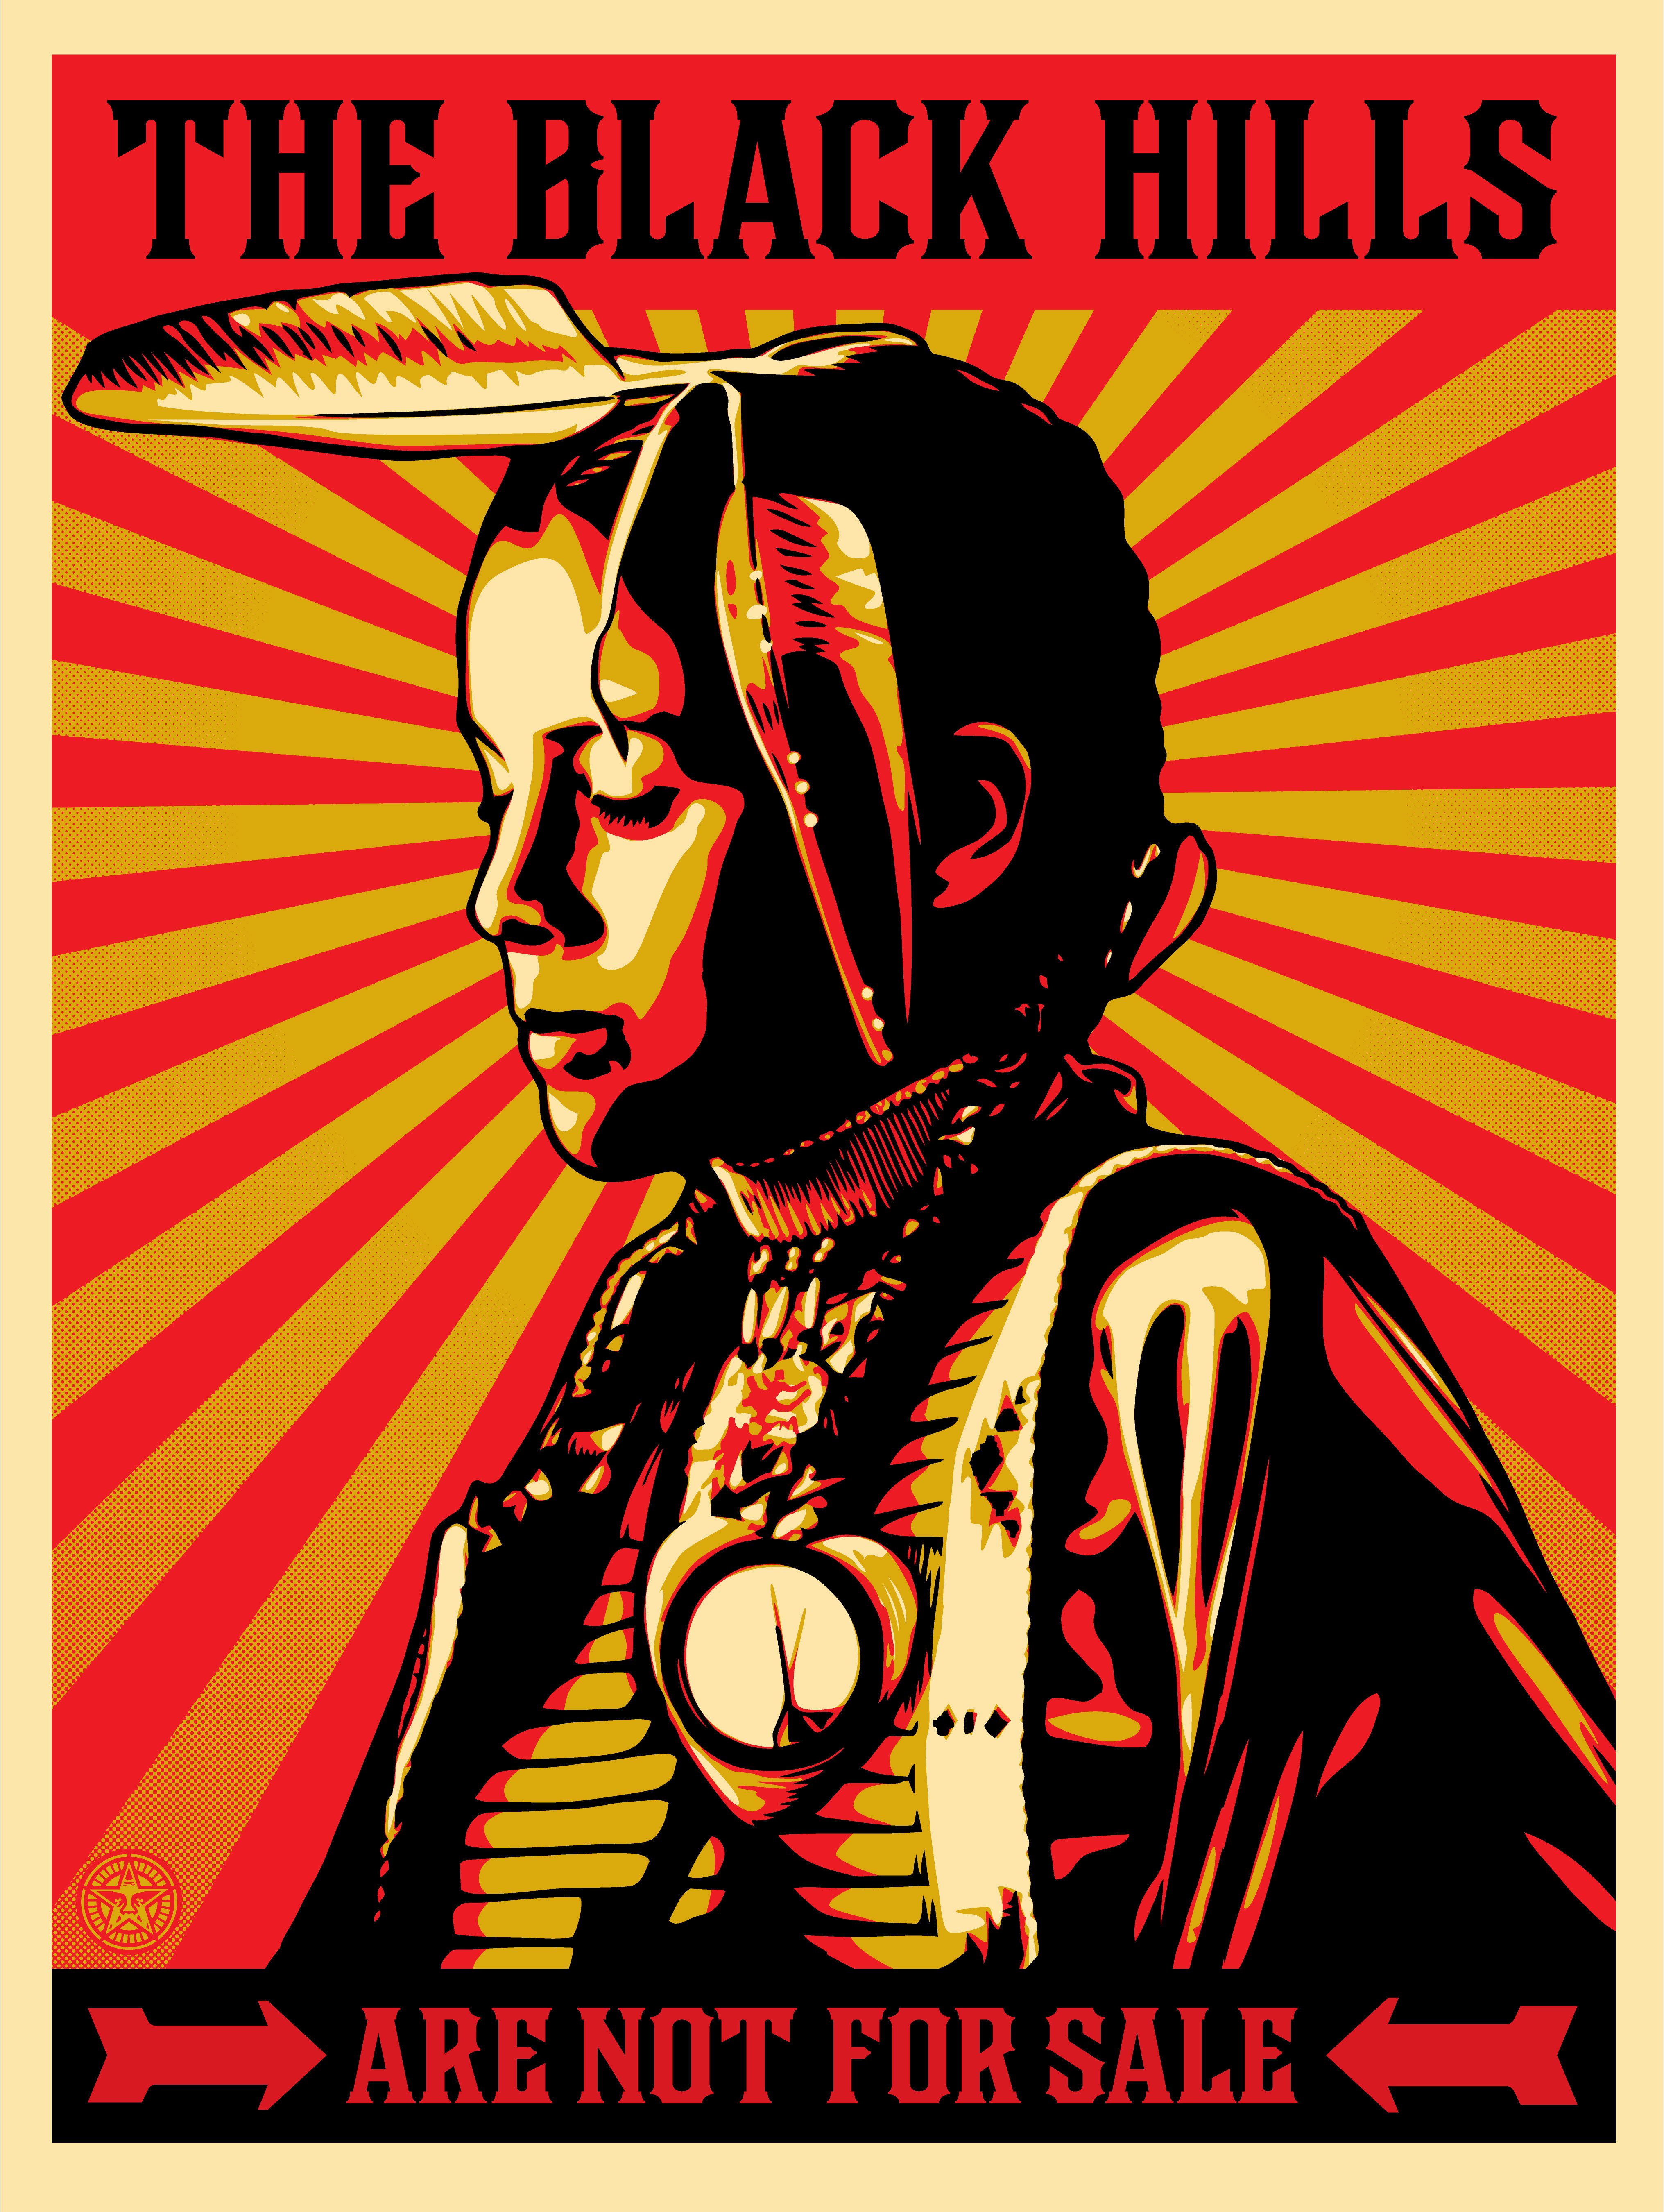 How Shepard Fairey's Art Has Become the Cornerstone of America's Political Landscape